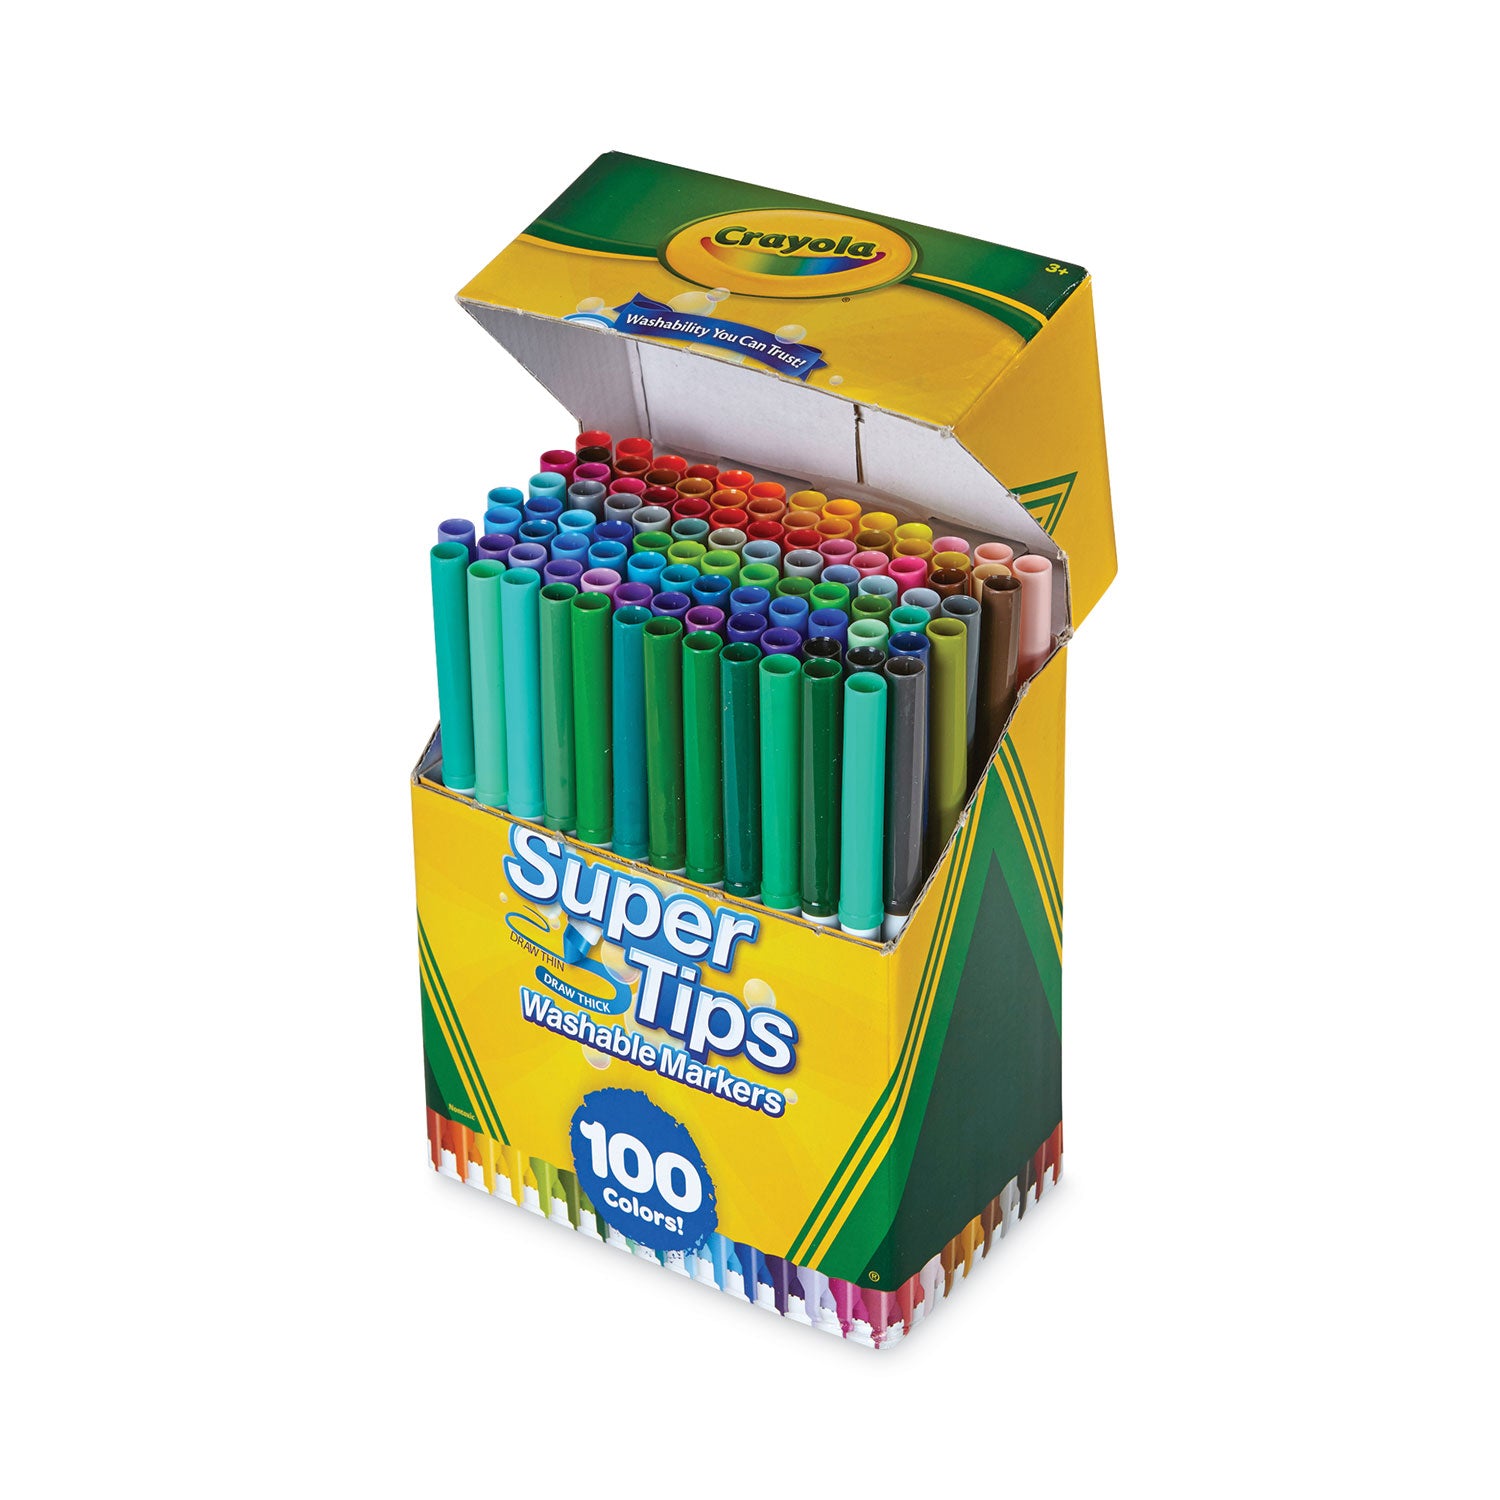 super-tips-washable-markers-fine-broad-bullet-tips-assorted-colors-100-set_cyo585100 - 5